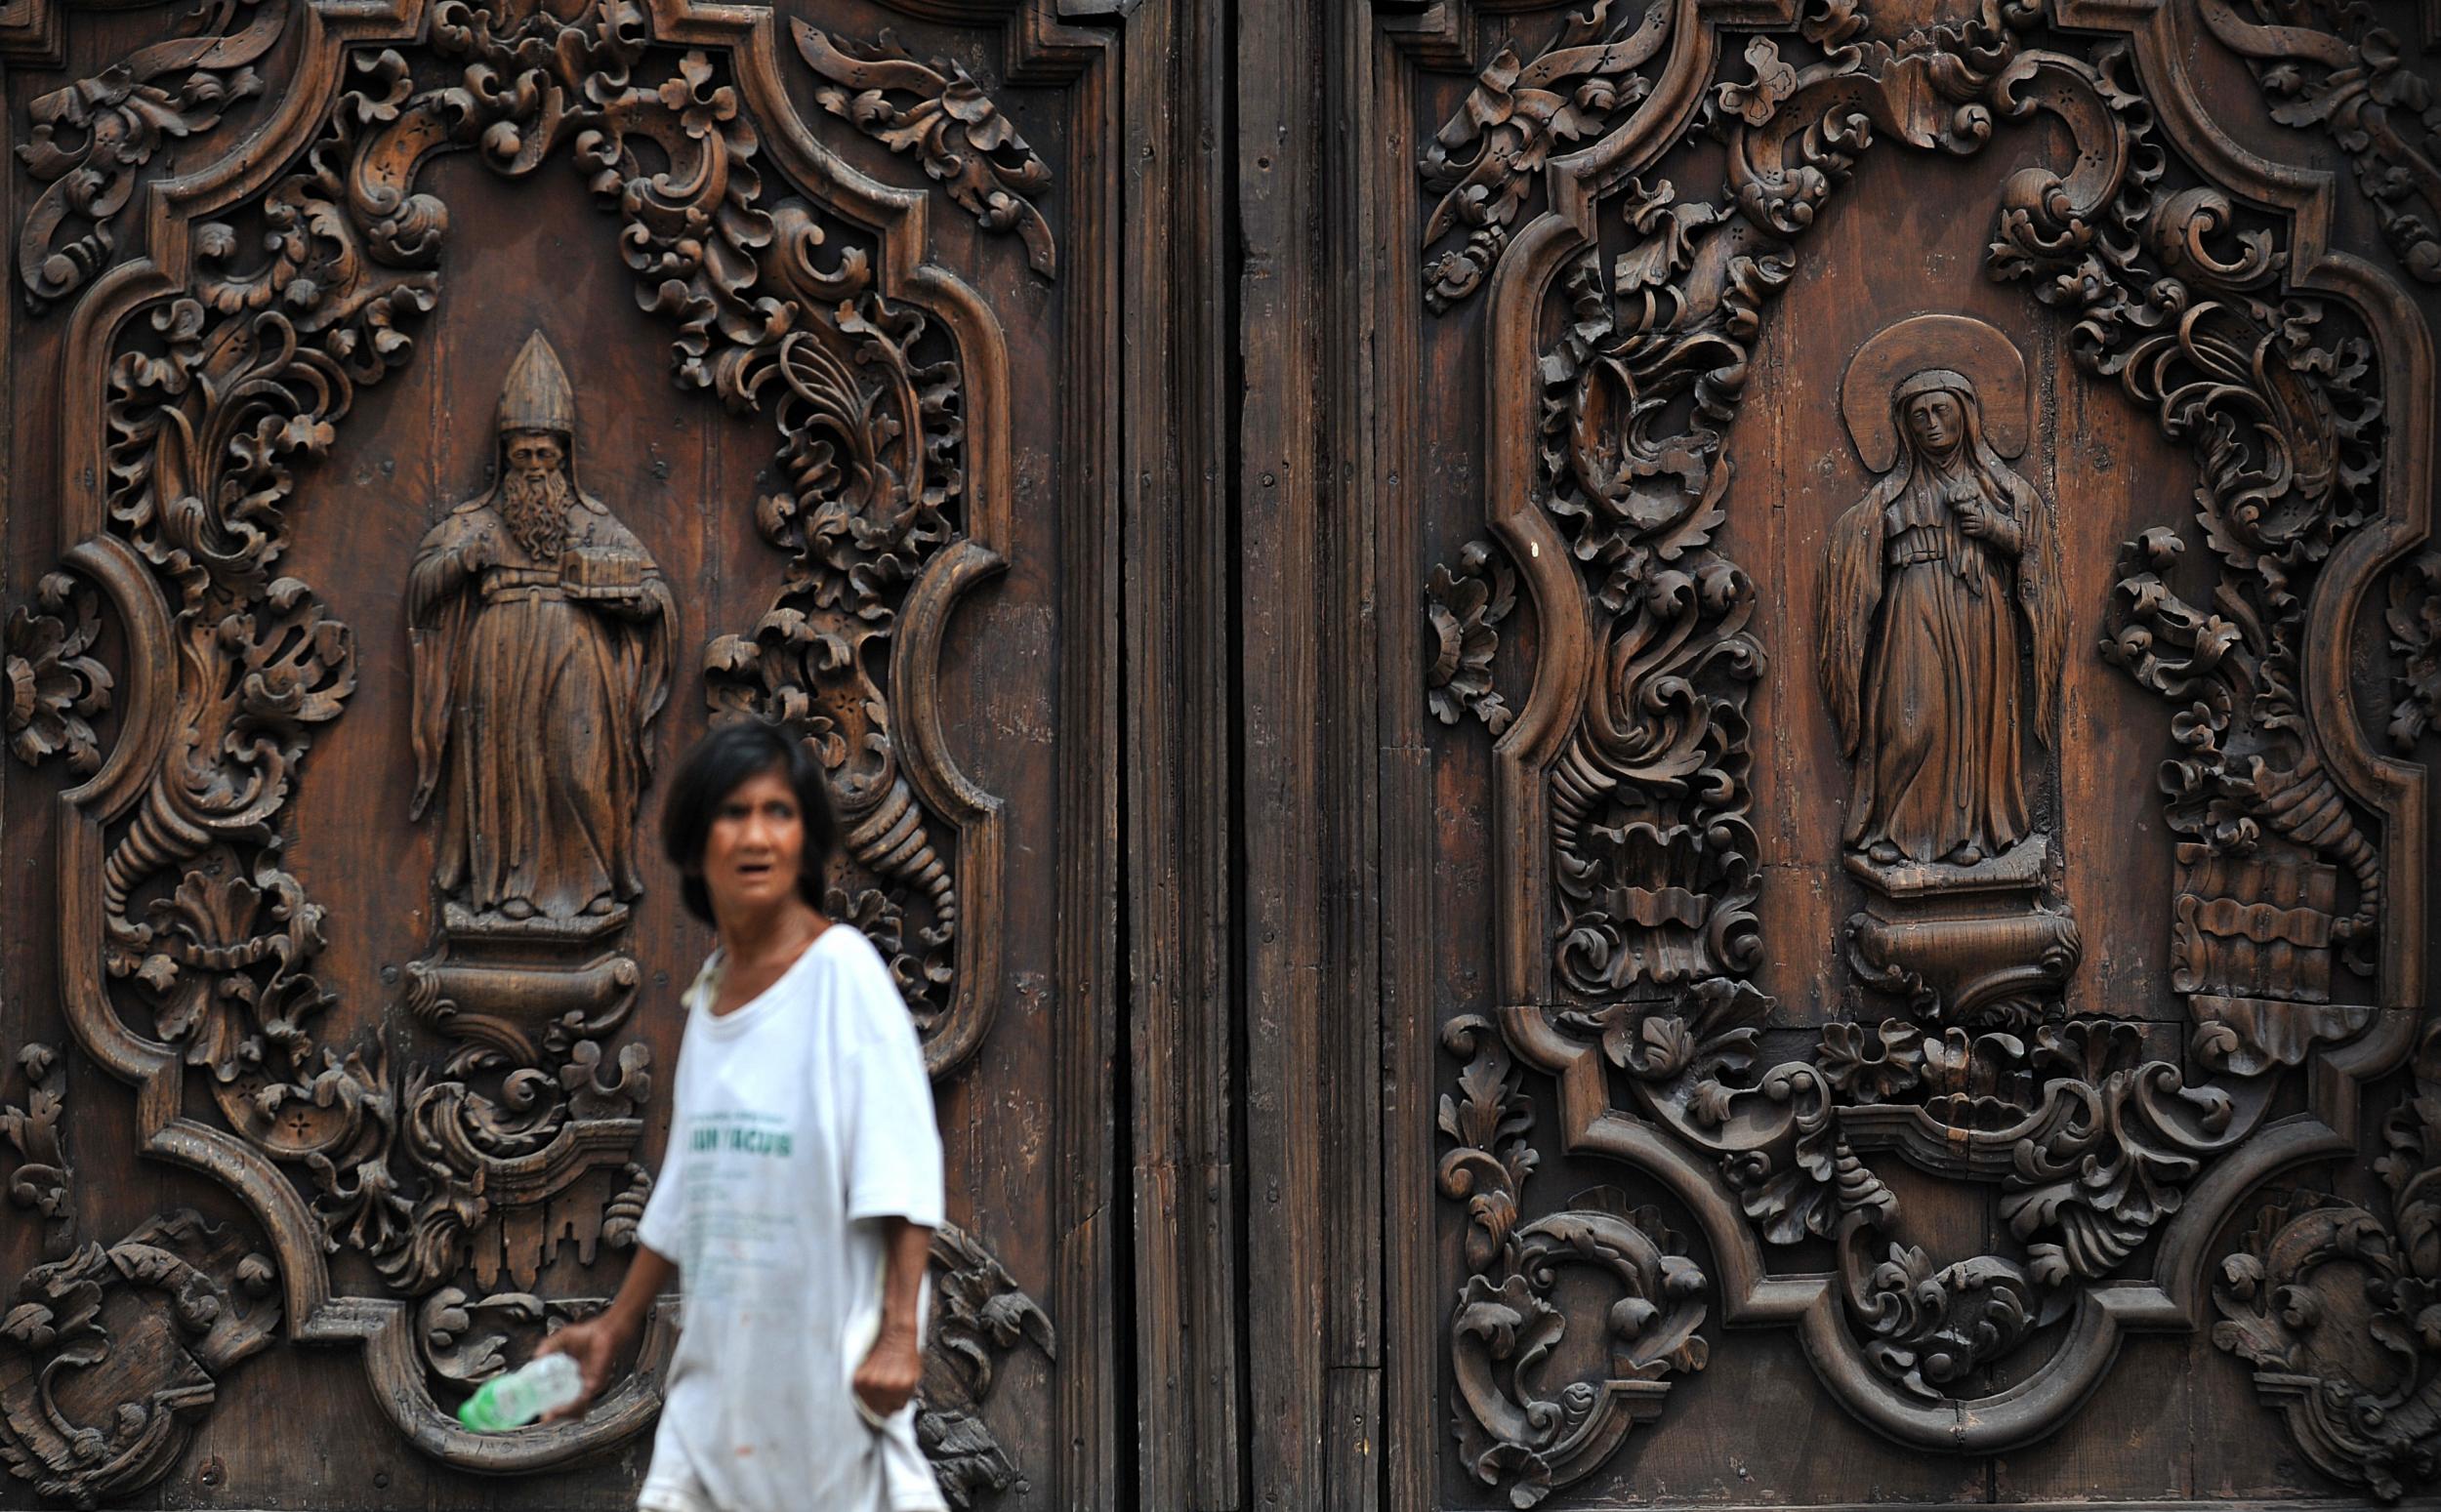 The intricately carved doors of San Augustin Church